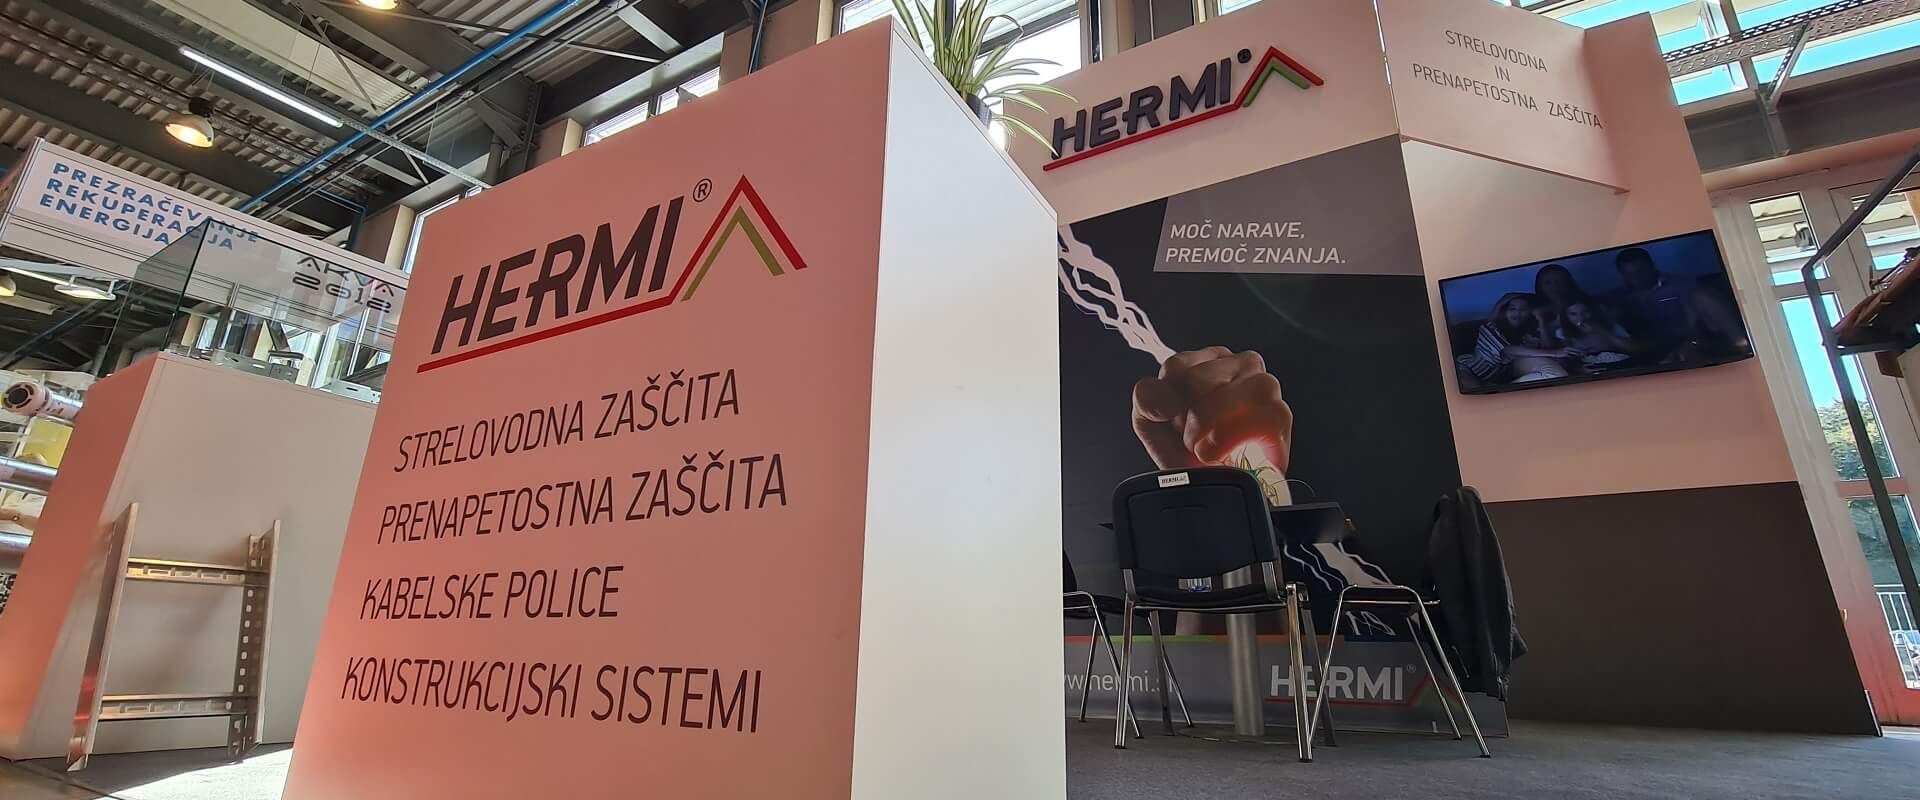 Hermi exhibiting at the 61st Home Fair in Ljubljana and at the 24th International Spring Fair in Bjelovar